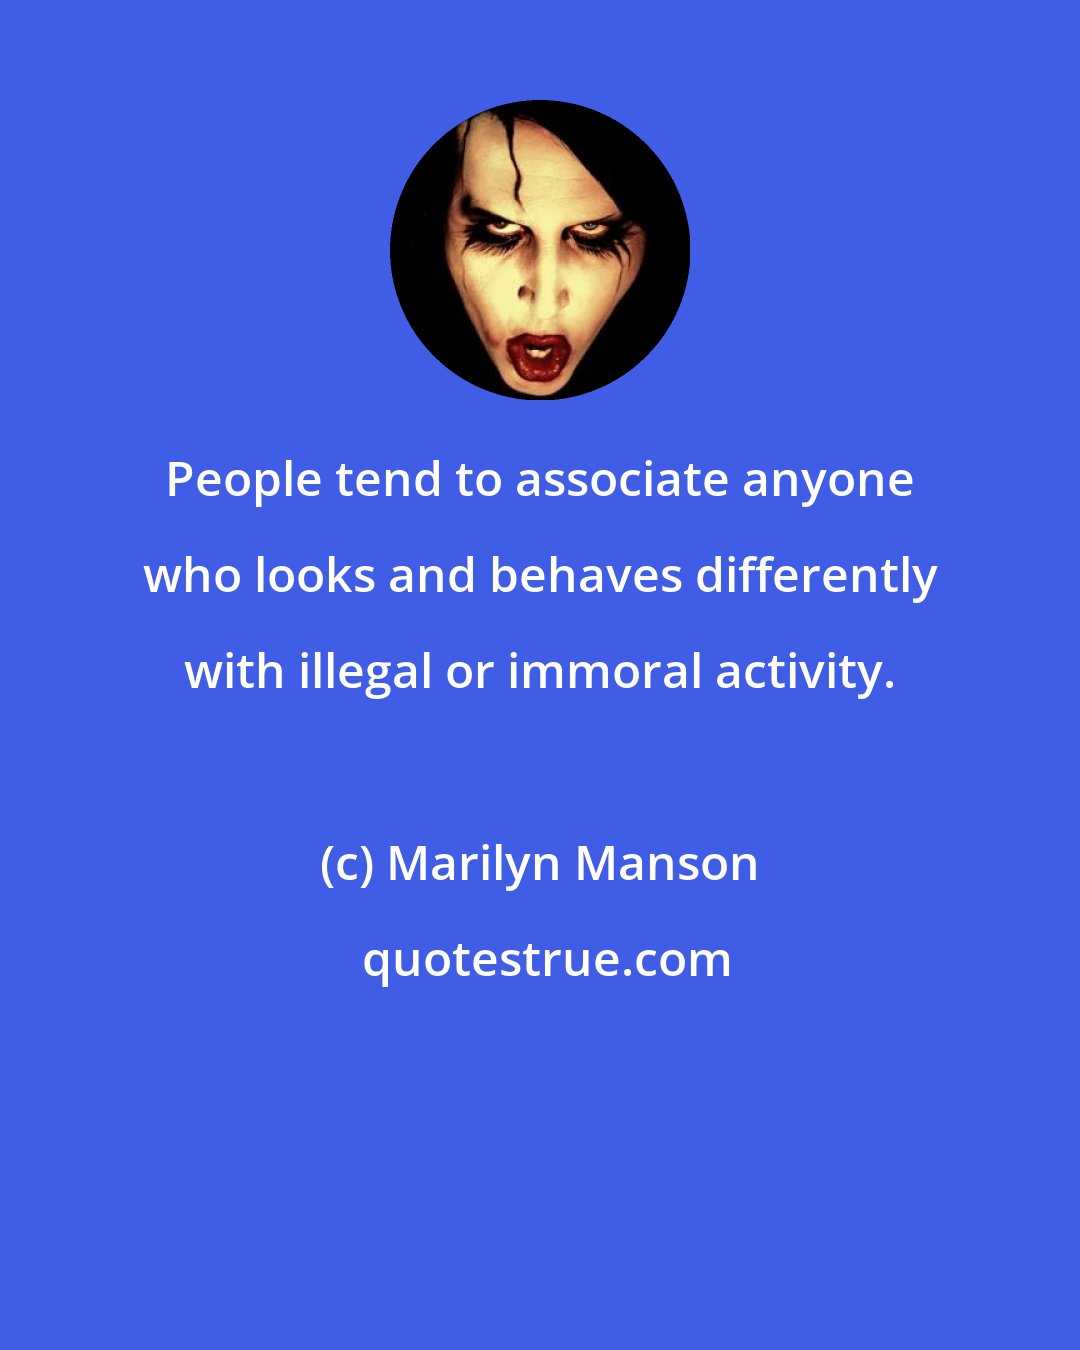 Marilyn Manson: People tend to associate anyone who looks and behaves differently with illegal or immoral activity.